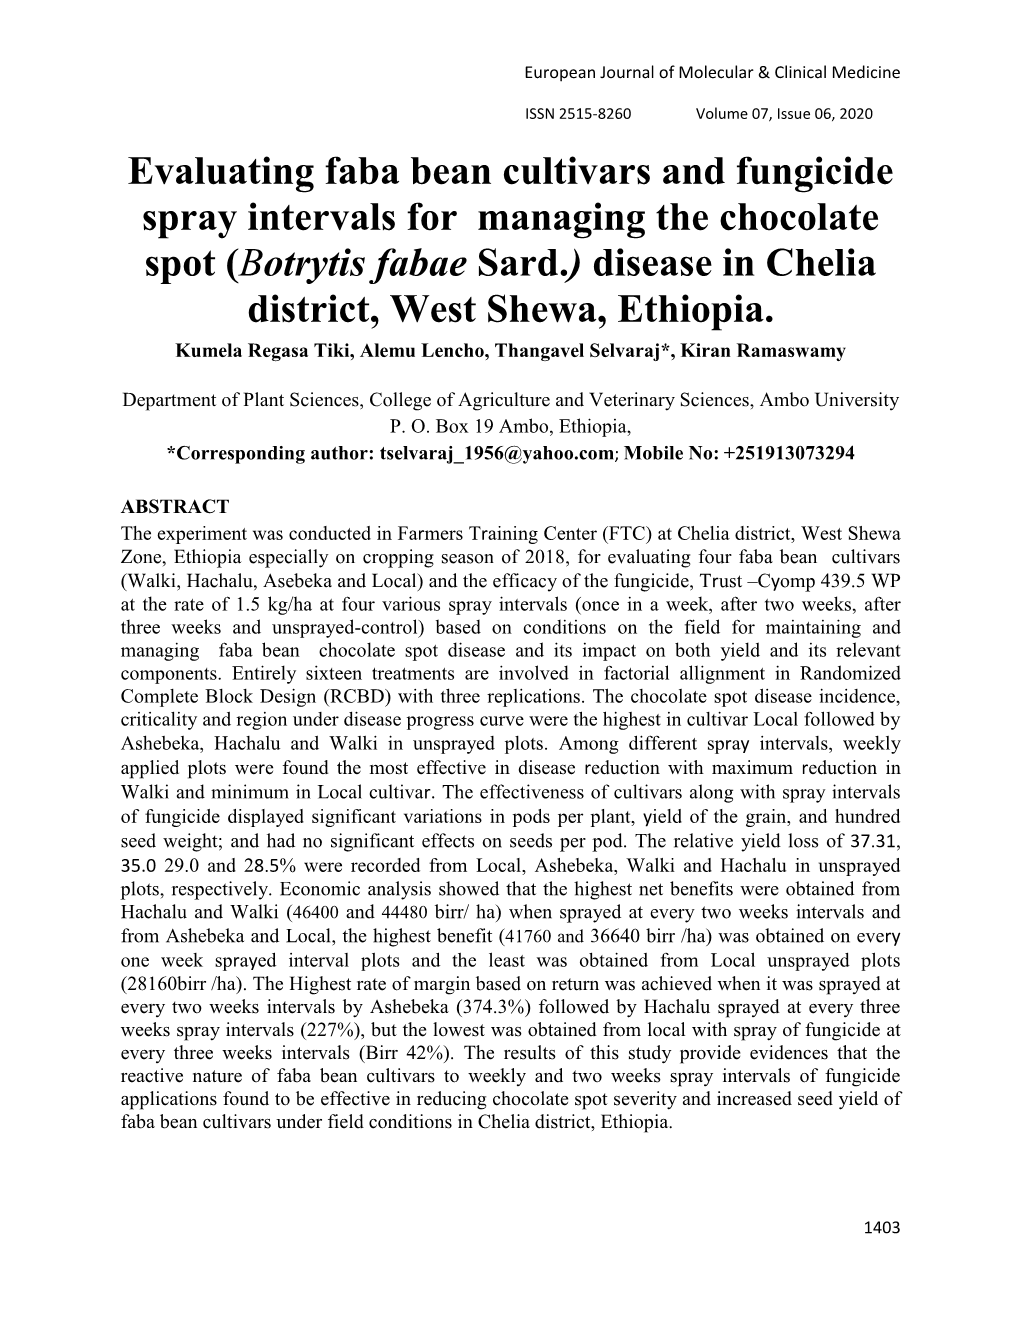 Evaluating Faba Bean Cultivars and Fungicide Spray Intervals for Managing the Chocolate Spot (Botrytis Fabae Sard.) Disease in Chelia District, West Shewa, Ethiopia